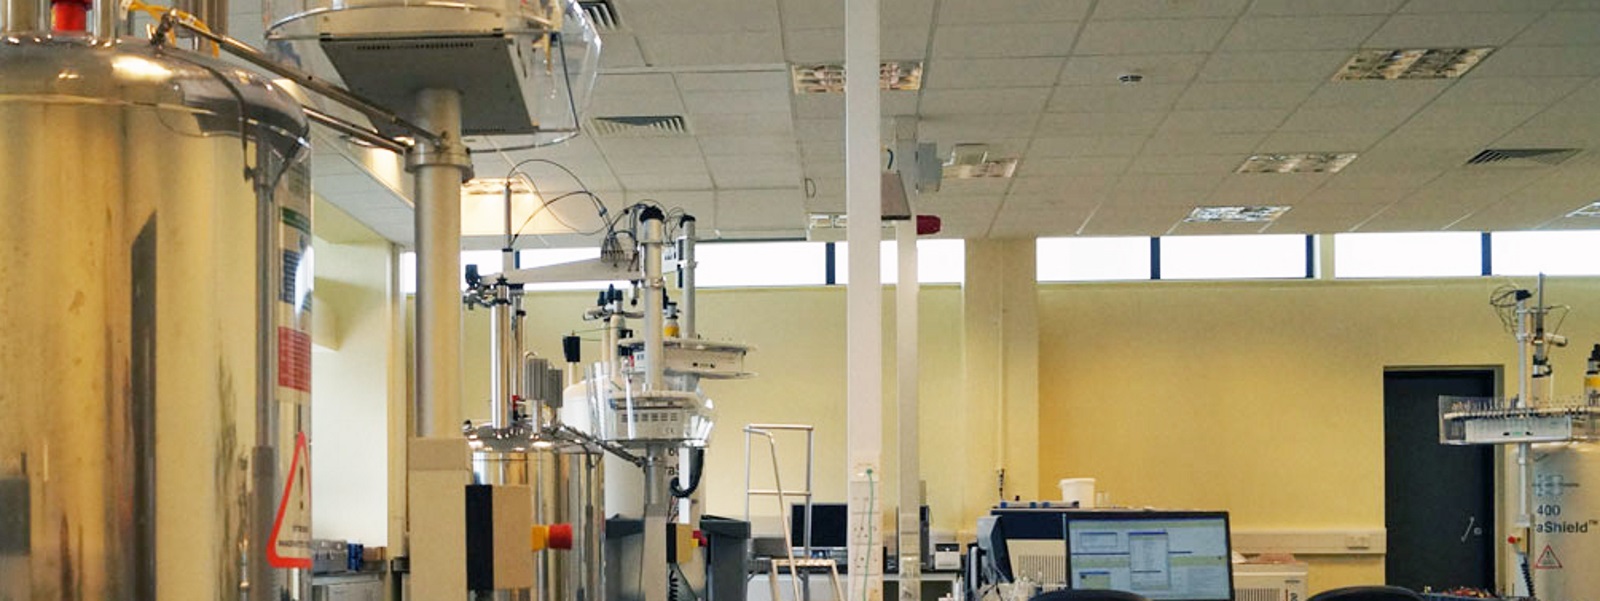 The NMR facility at Strathclyde